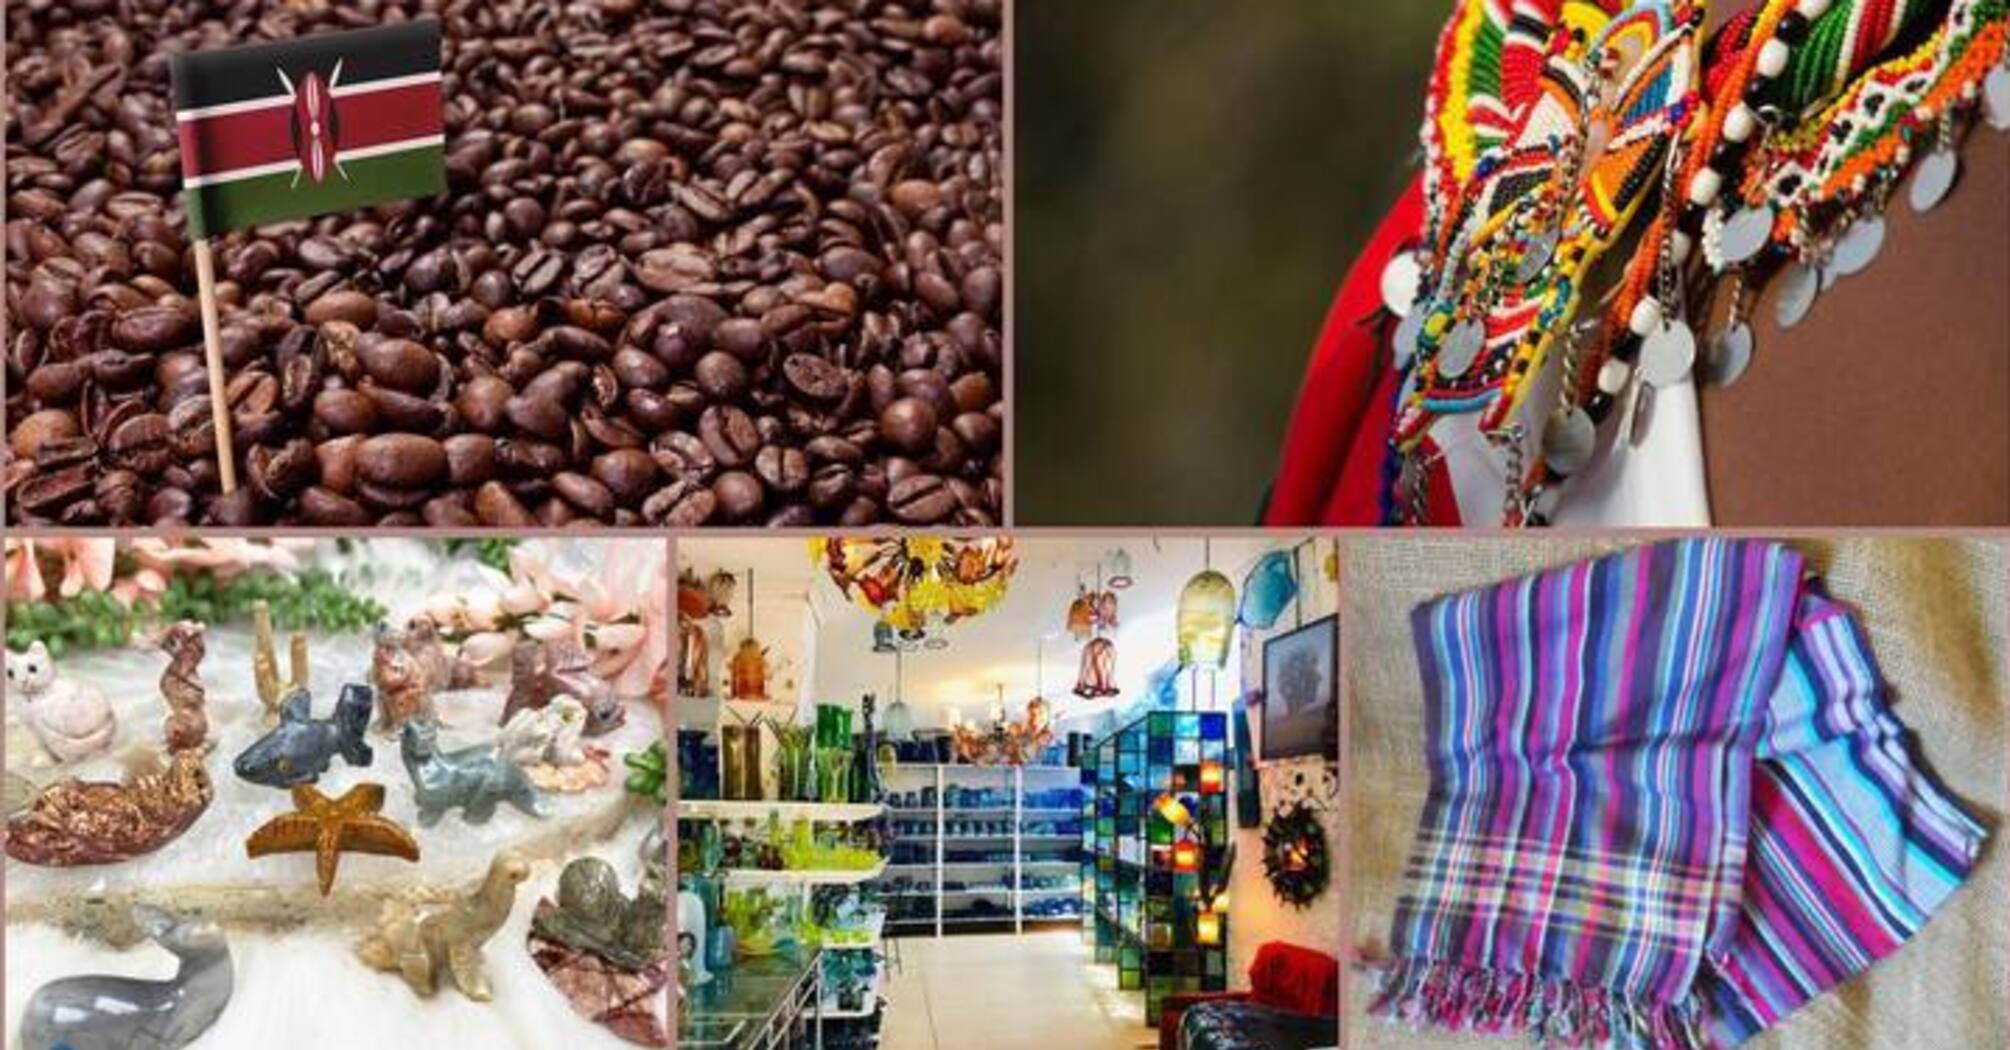 Coffee, clothes and beads: What tourists bring back from Kenya